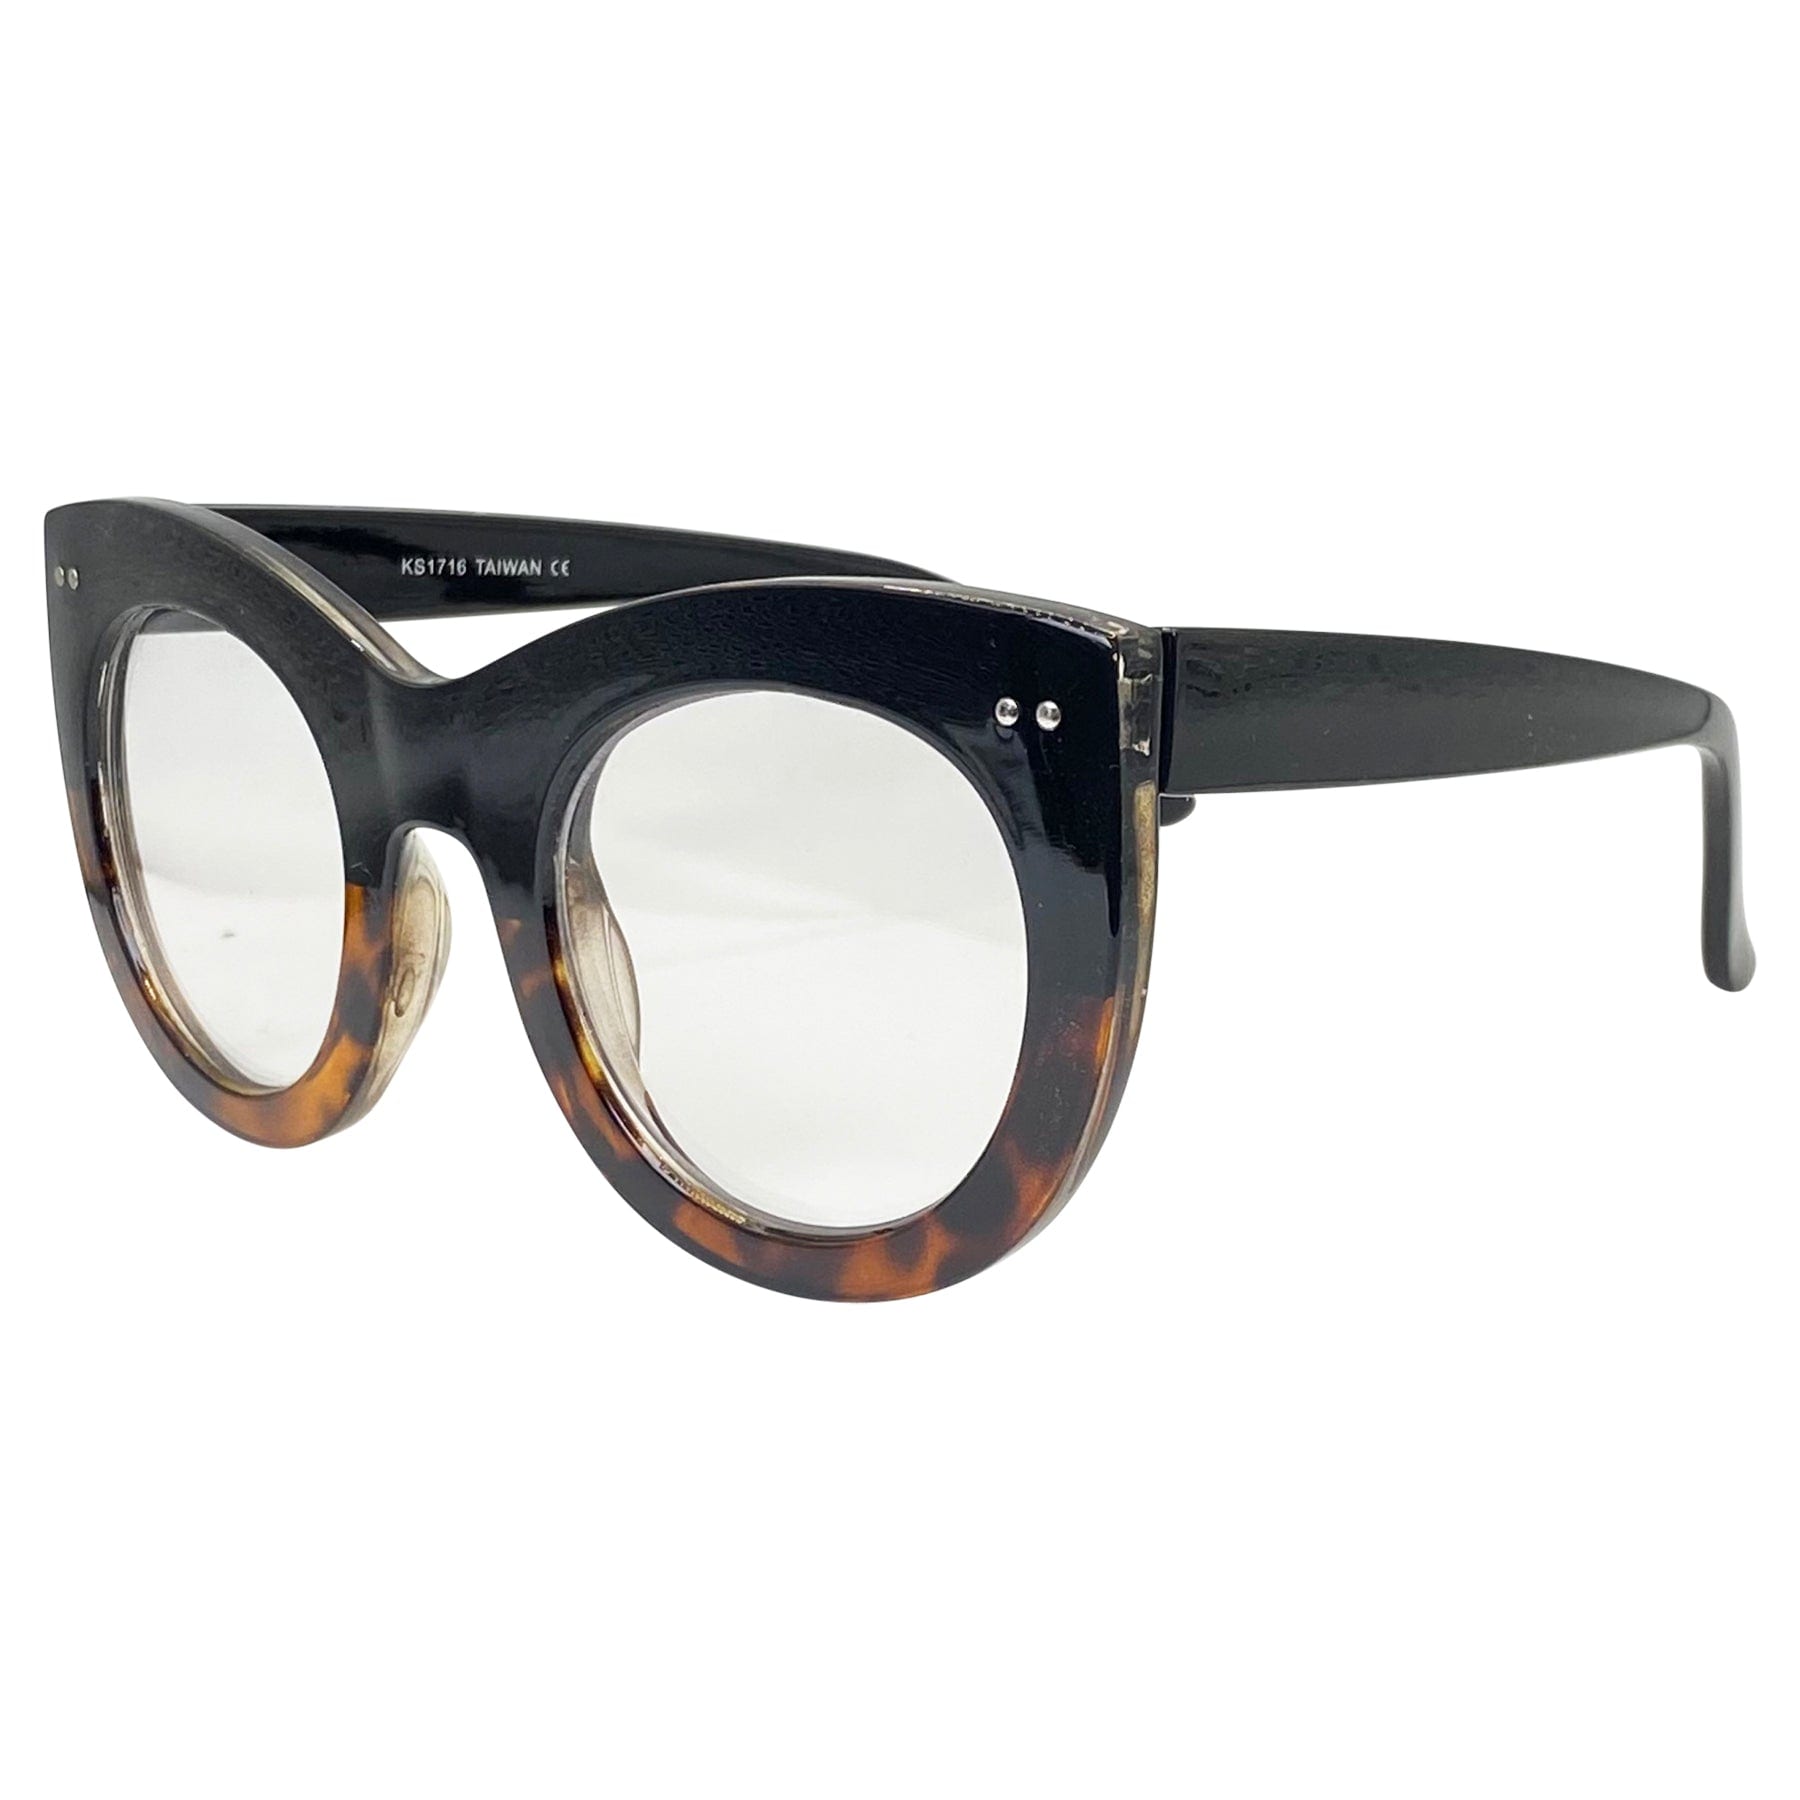 black and tortoise colored glasses with a rounded cat eye shaped frame